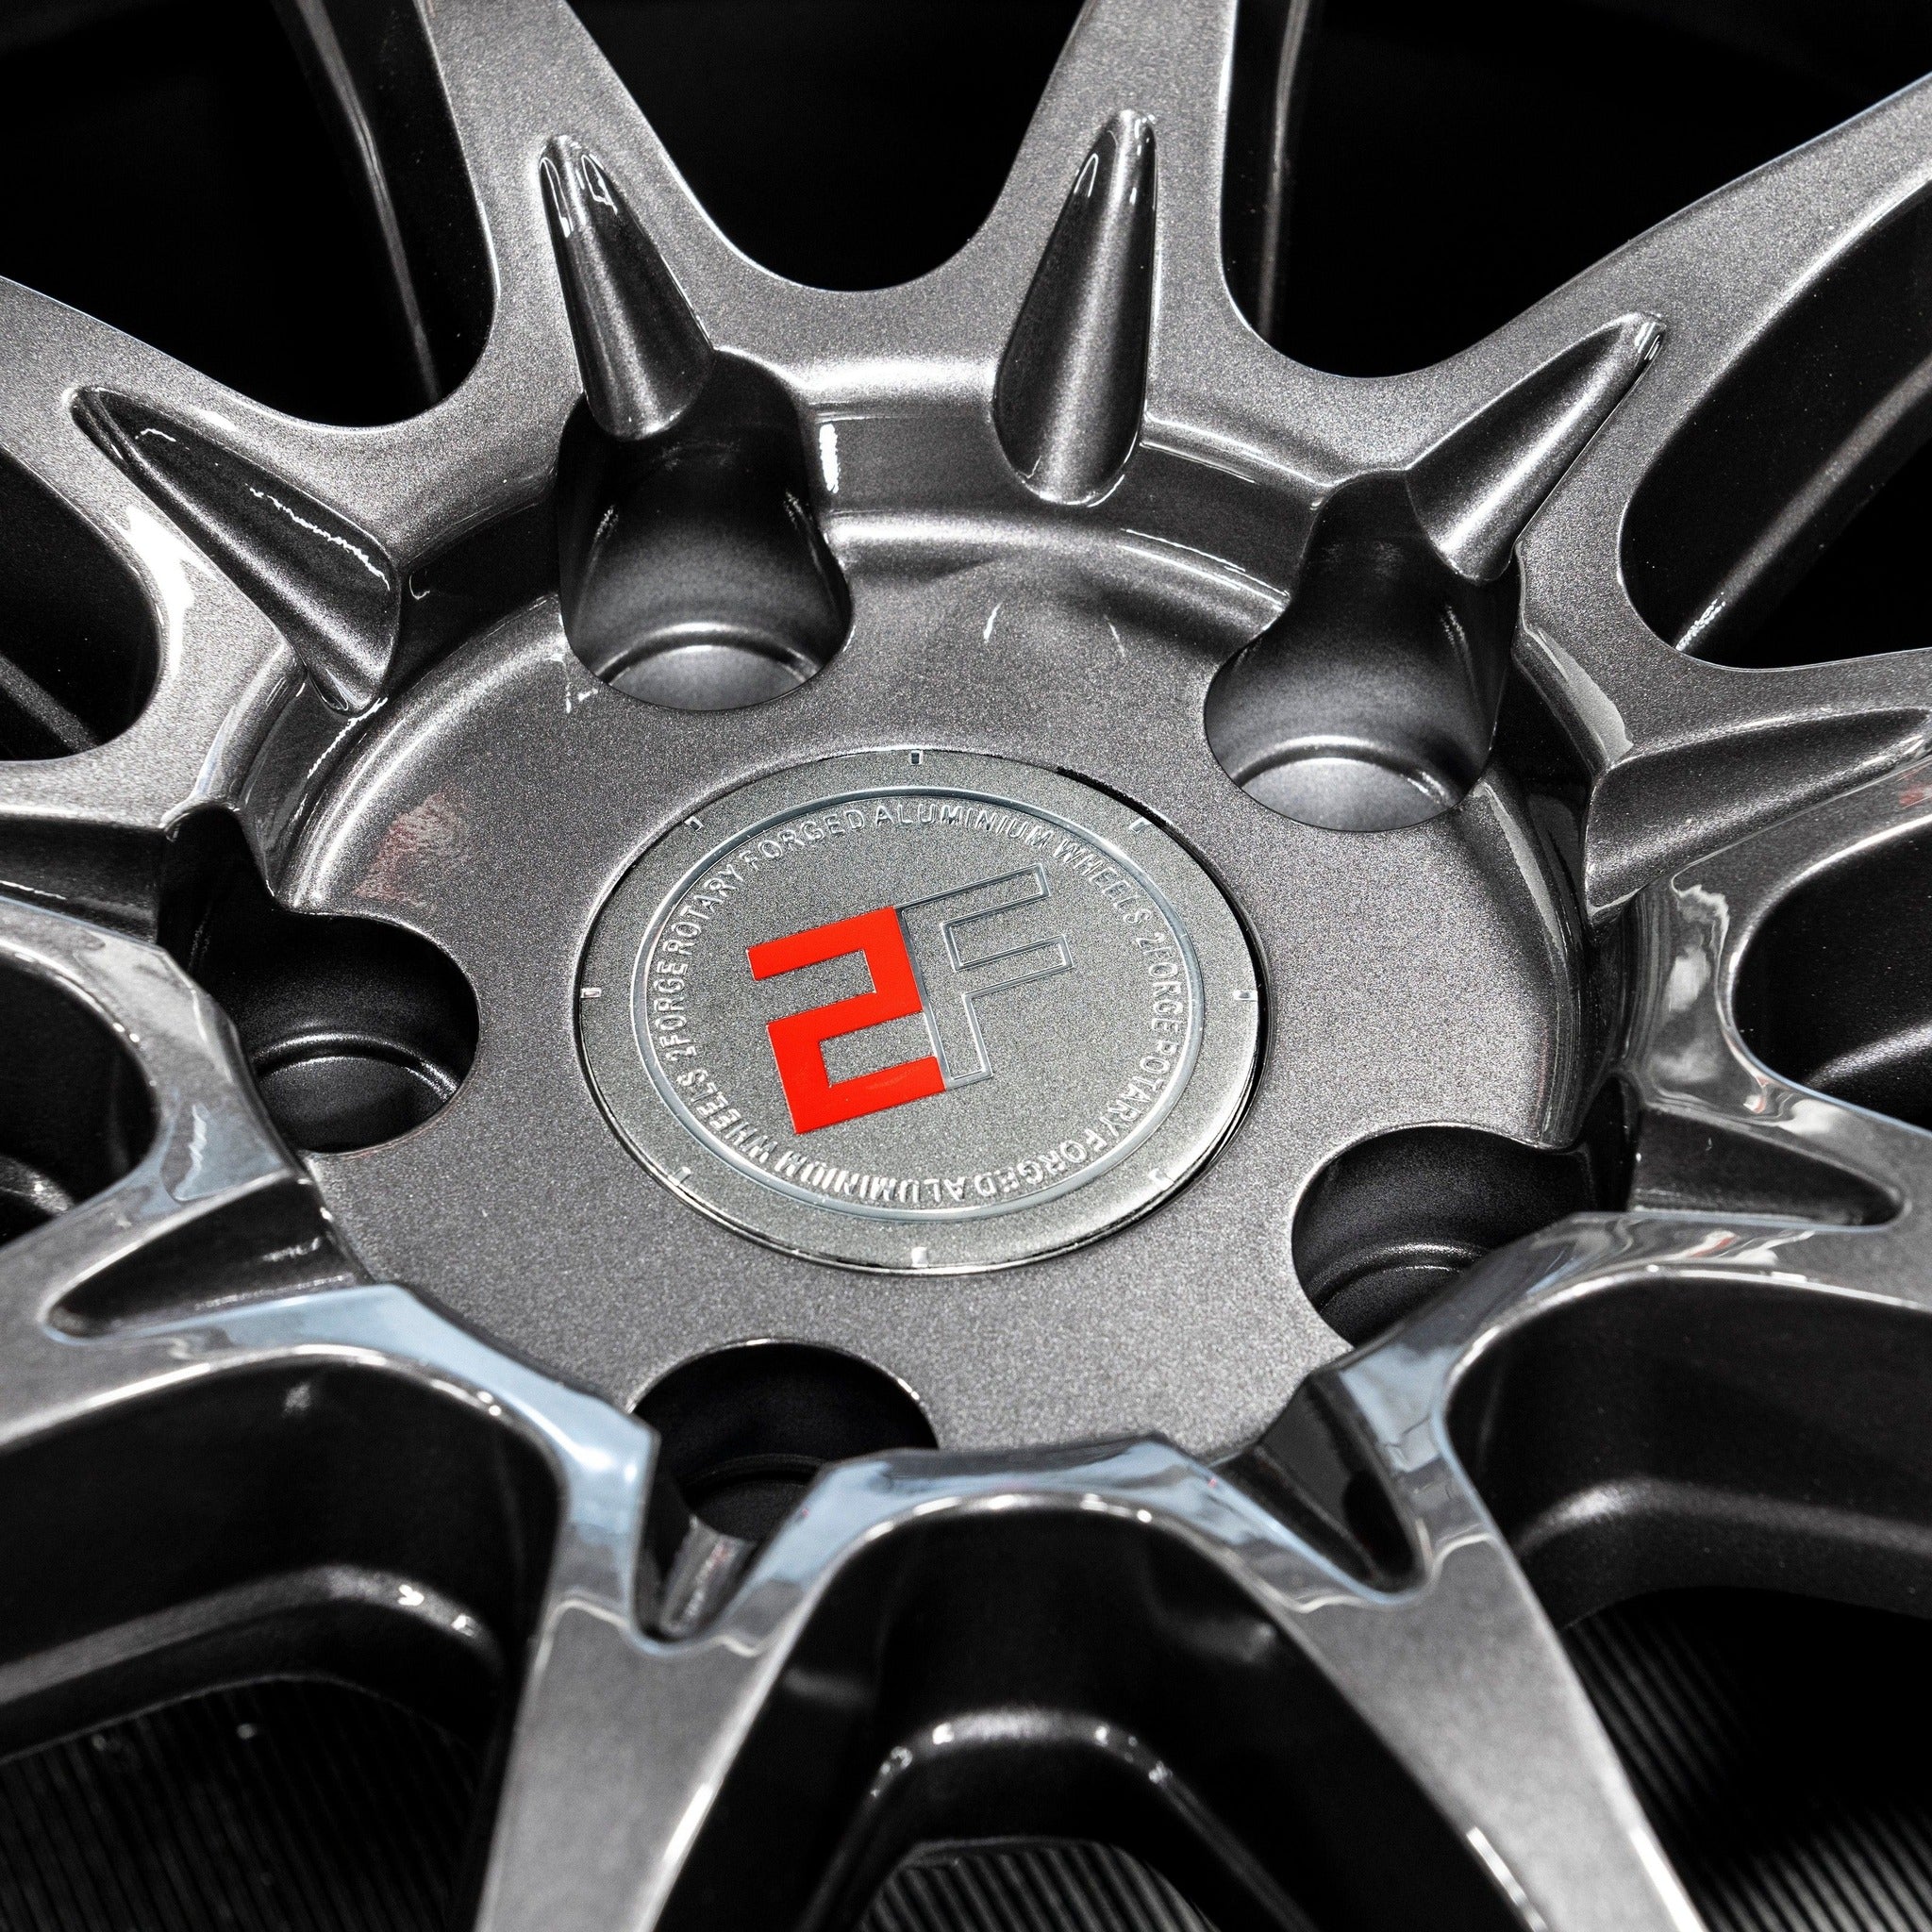 2Forge ZF8 Semi-Forged Wheels, Flow Forged Wheels, 2Forge - AUTOID | Premium Automotive Accessories